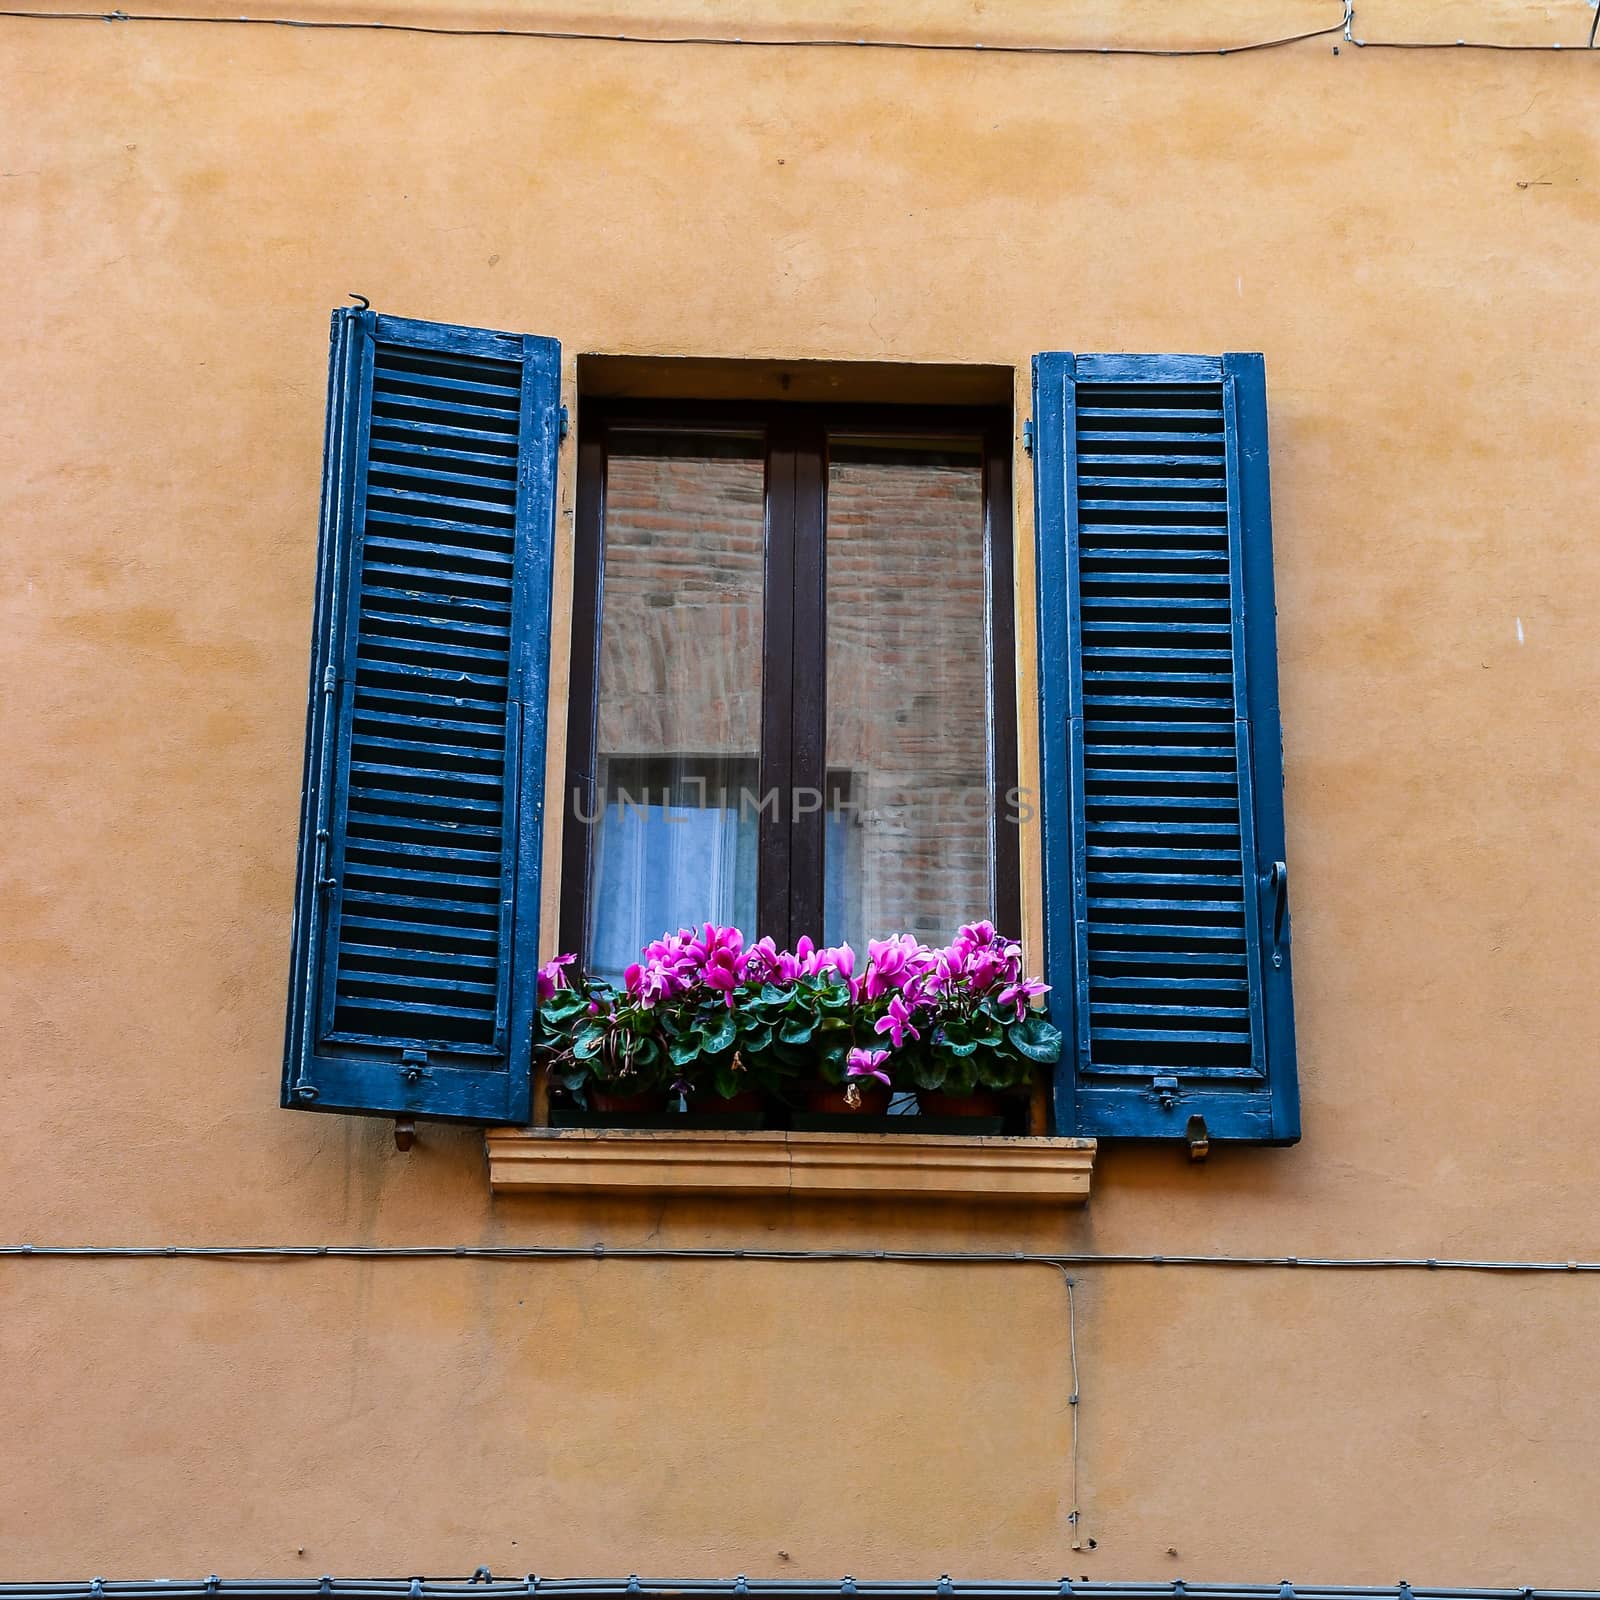 Window of a historic building with purple flowers on the sill